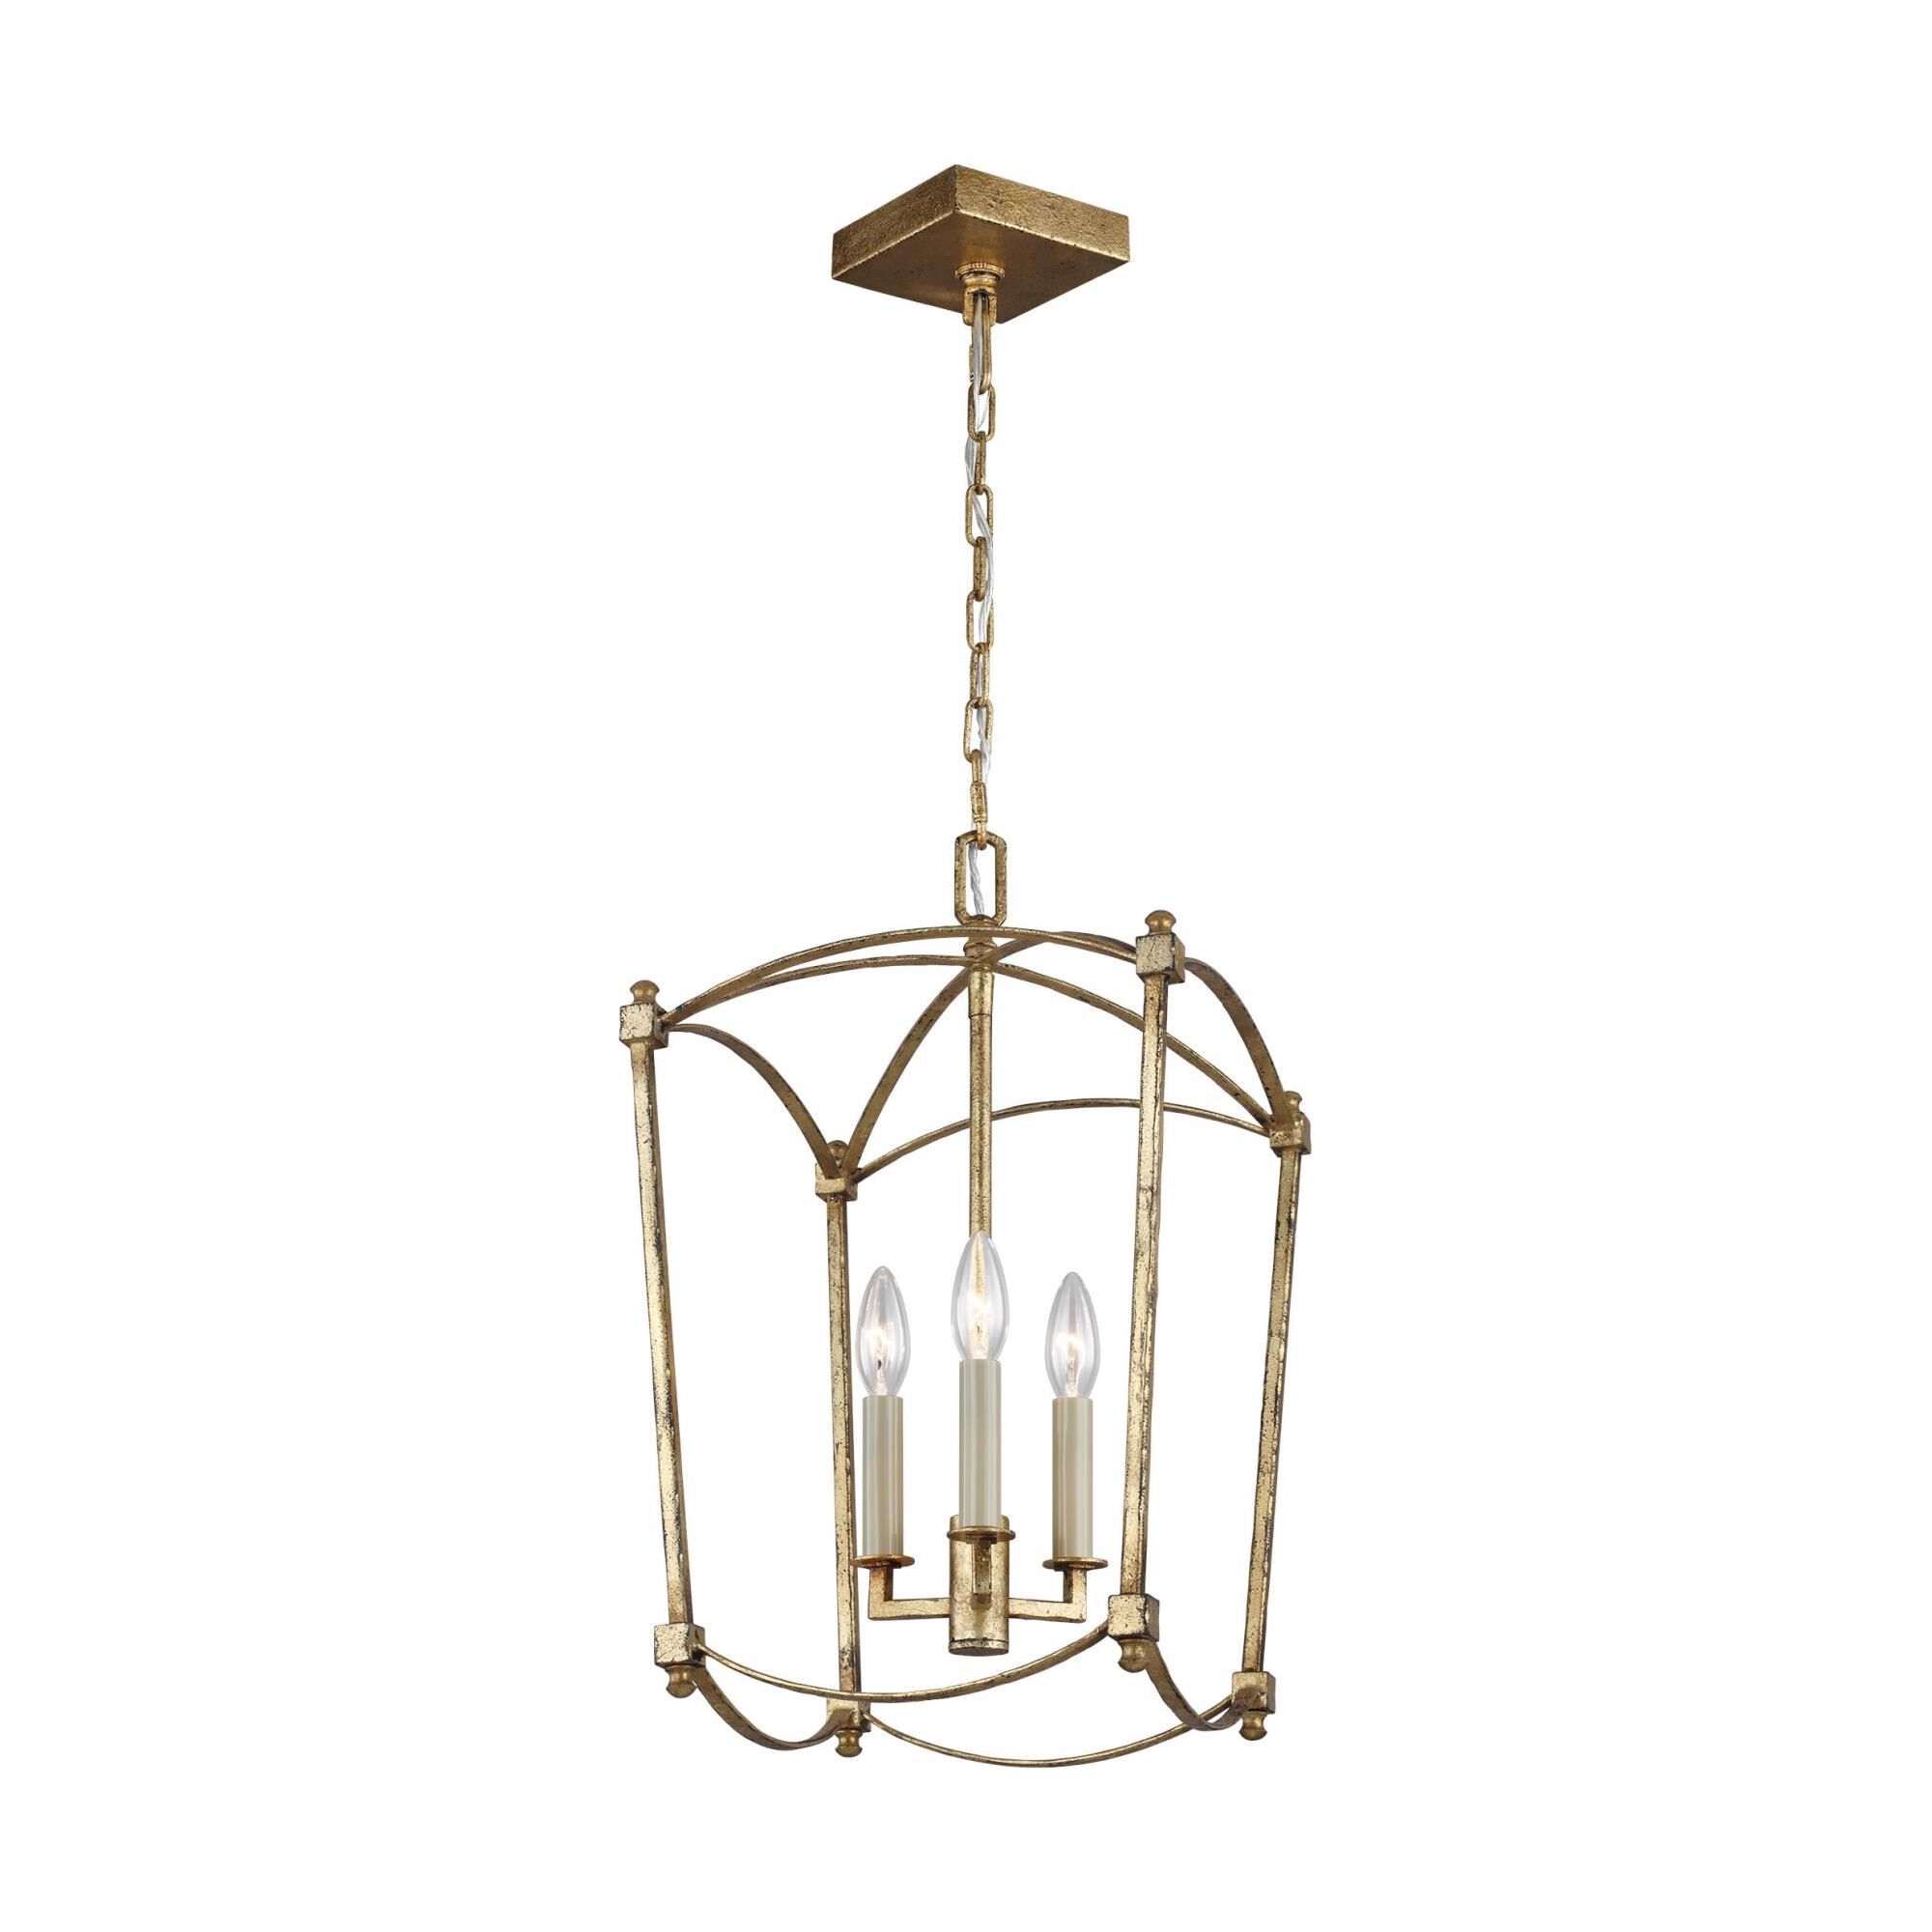 New




Feiss Thayer 12 Inch 3 Light Mini Chandelier by Generation Lighting

Capitol ID: 2285639
... | Capitol Lighting 1800lighting.com